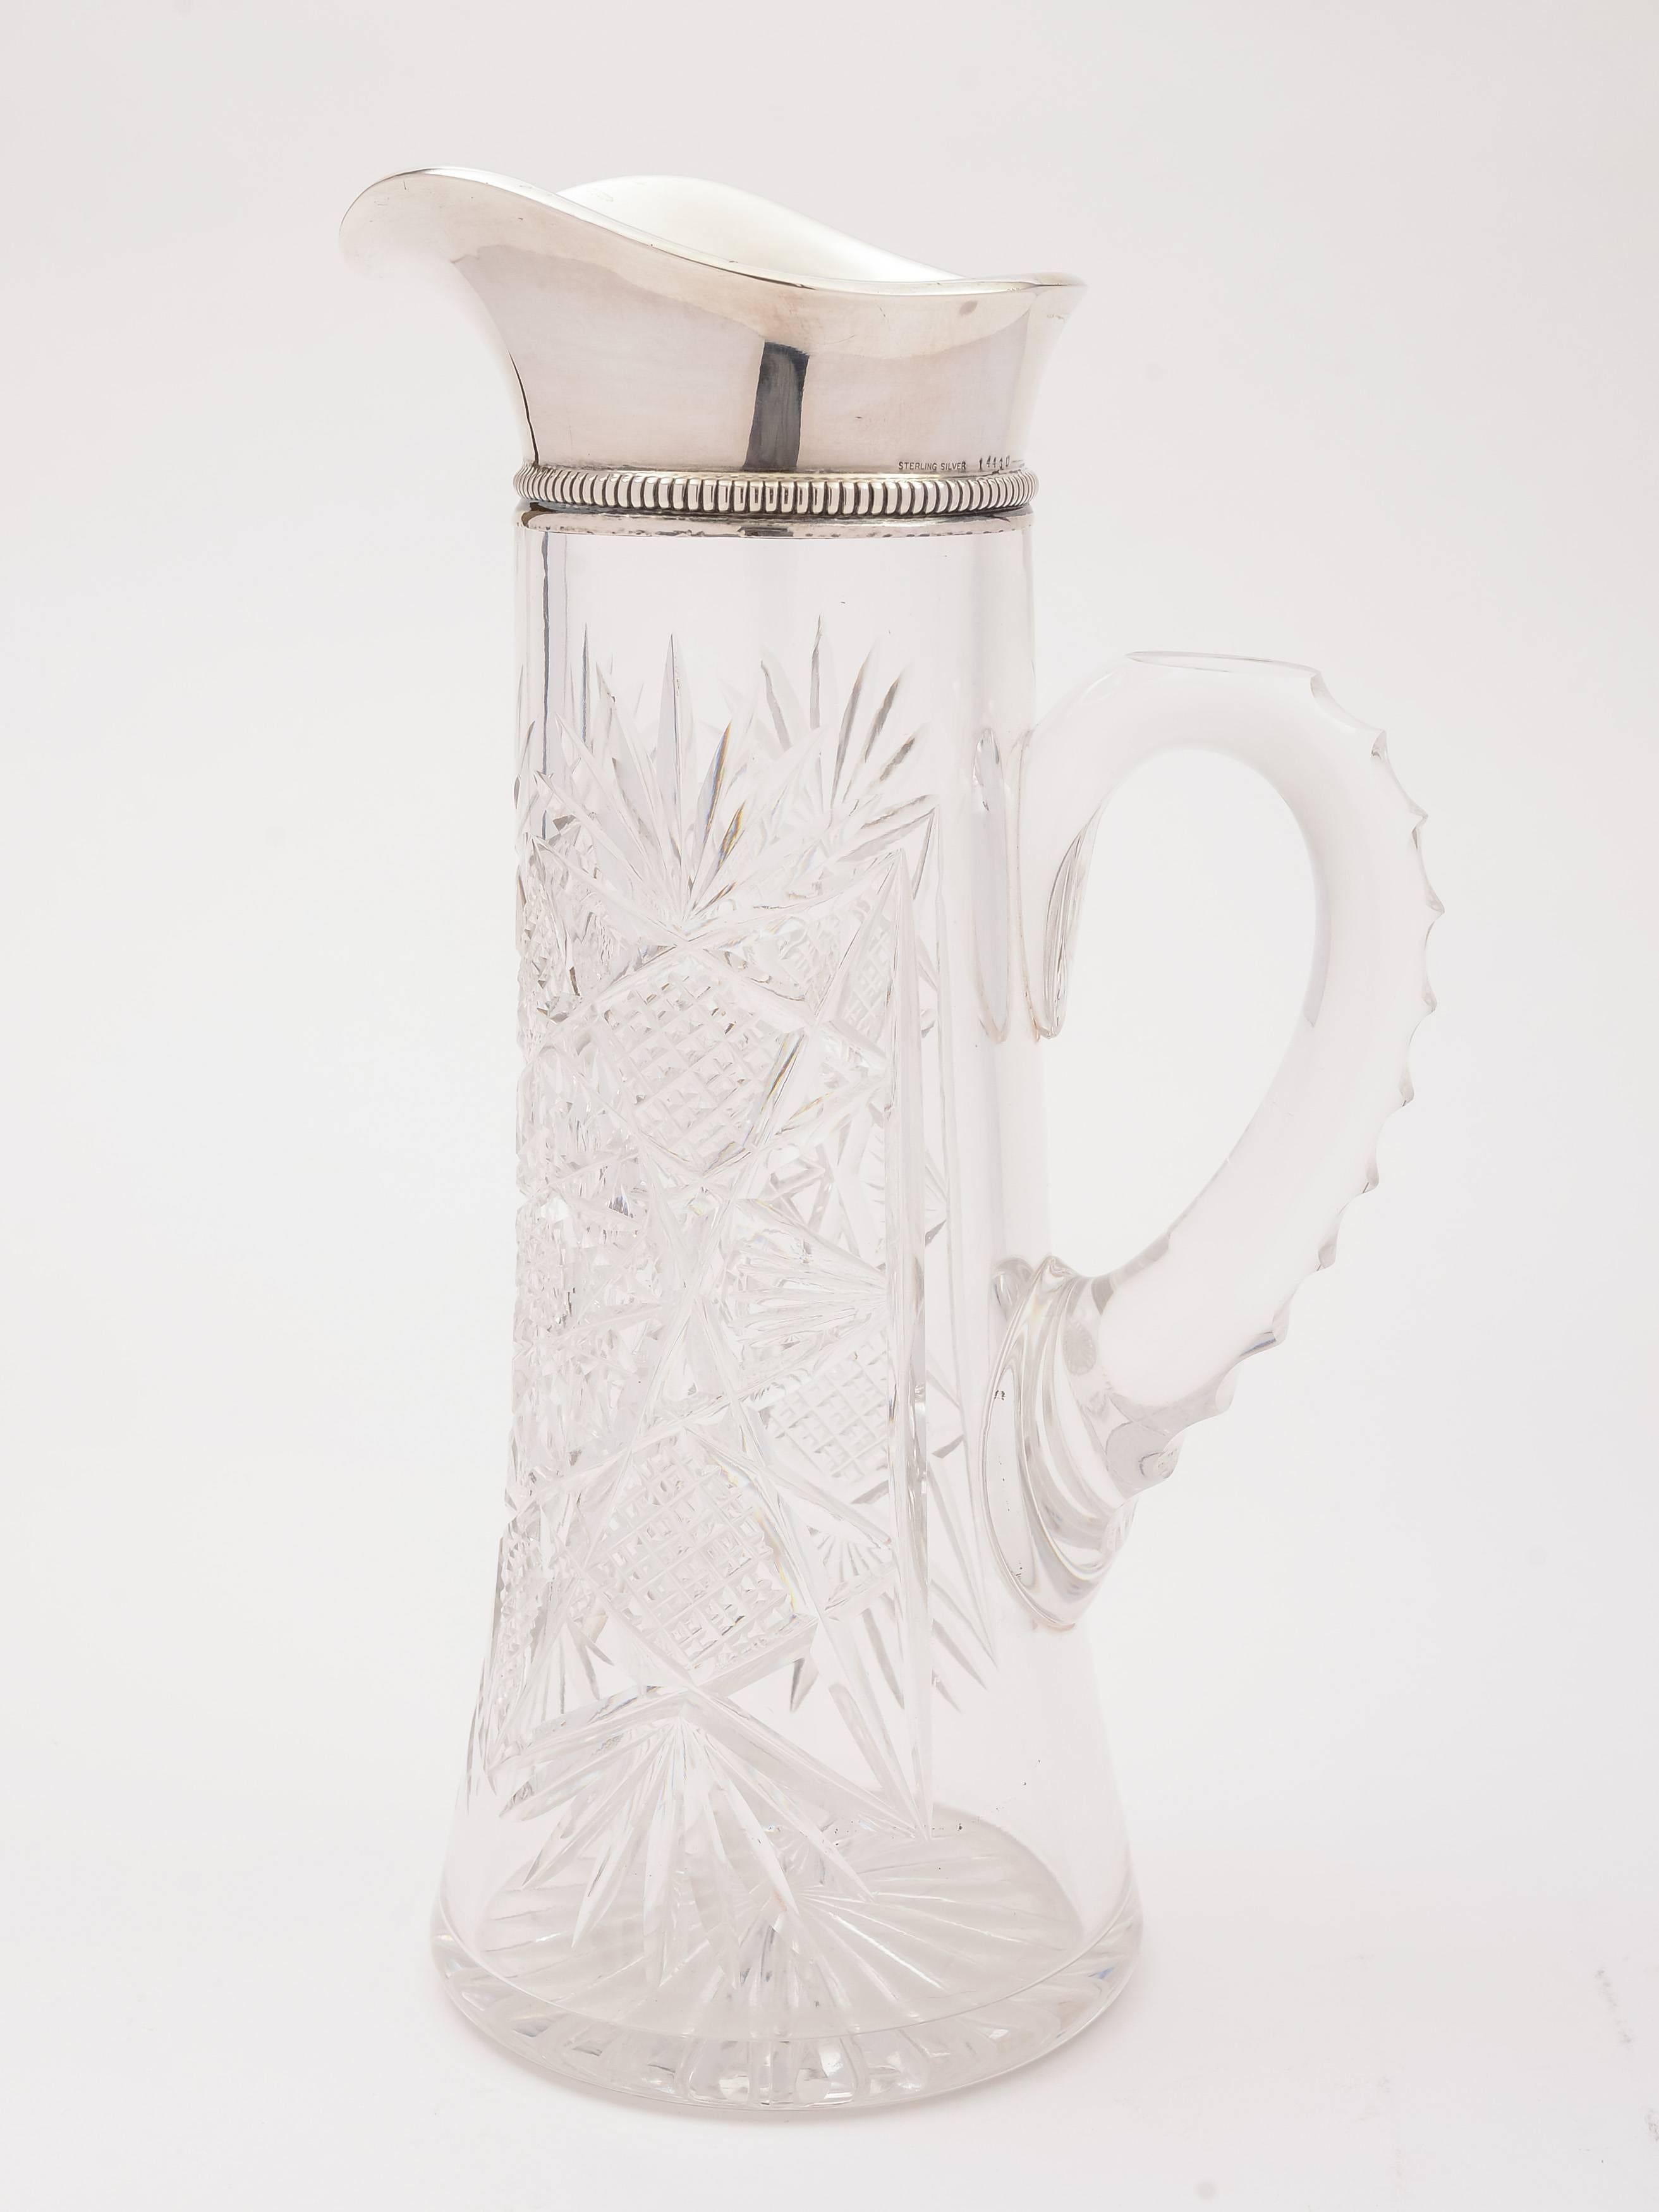 A nice American silver topped and cut-glass jug / pitcher. The top is marked sterling .925 with an English import mark for Birmingham, 1905. Has lovely cut-glass decoration, star cut base and solid glass handle.

Free worldwide